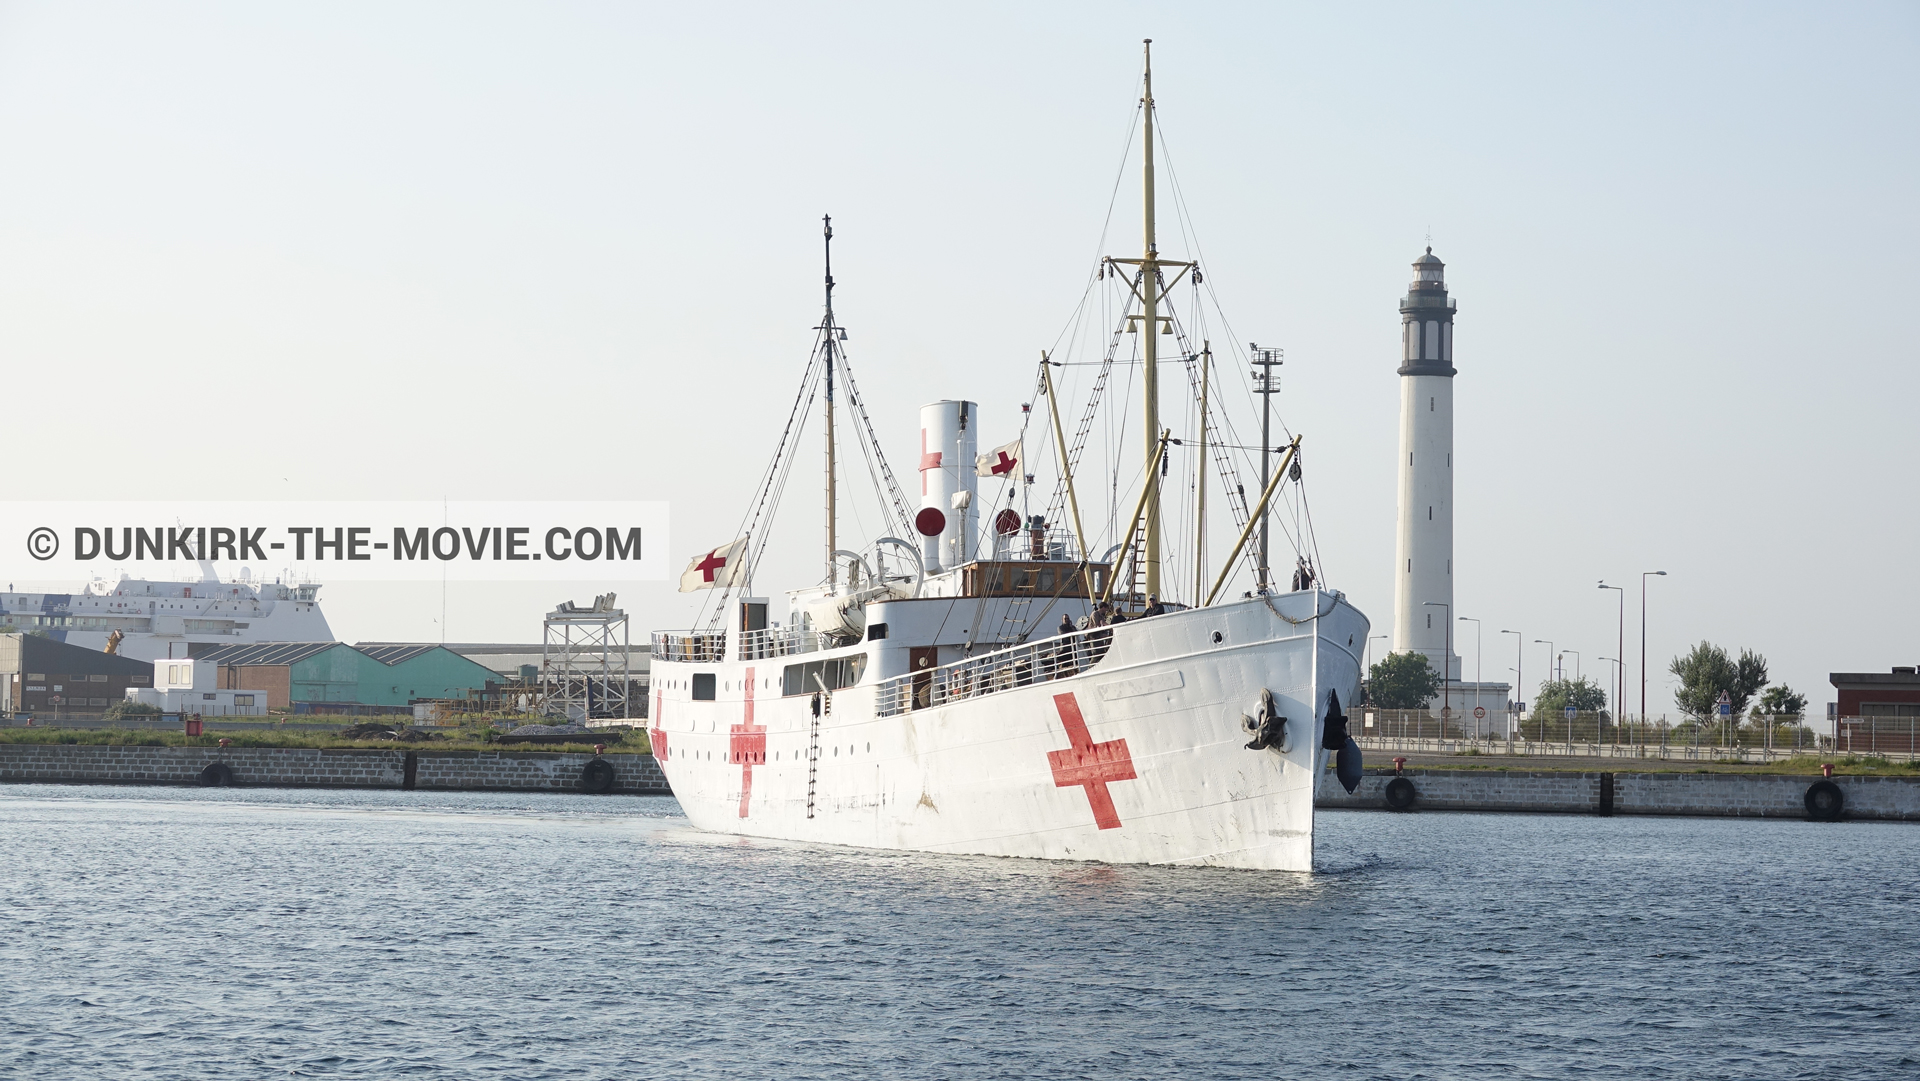 Picture with Dunkirk lighthouse, M/S Rogaland,  from behind the scene of the Dunkirk movie by Nolan